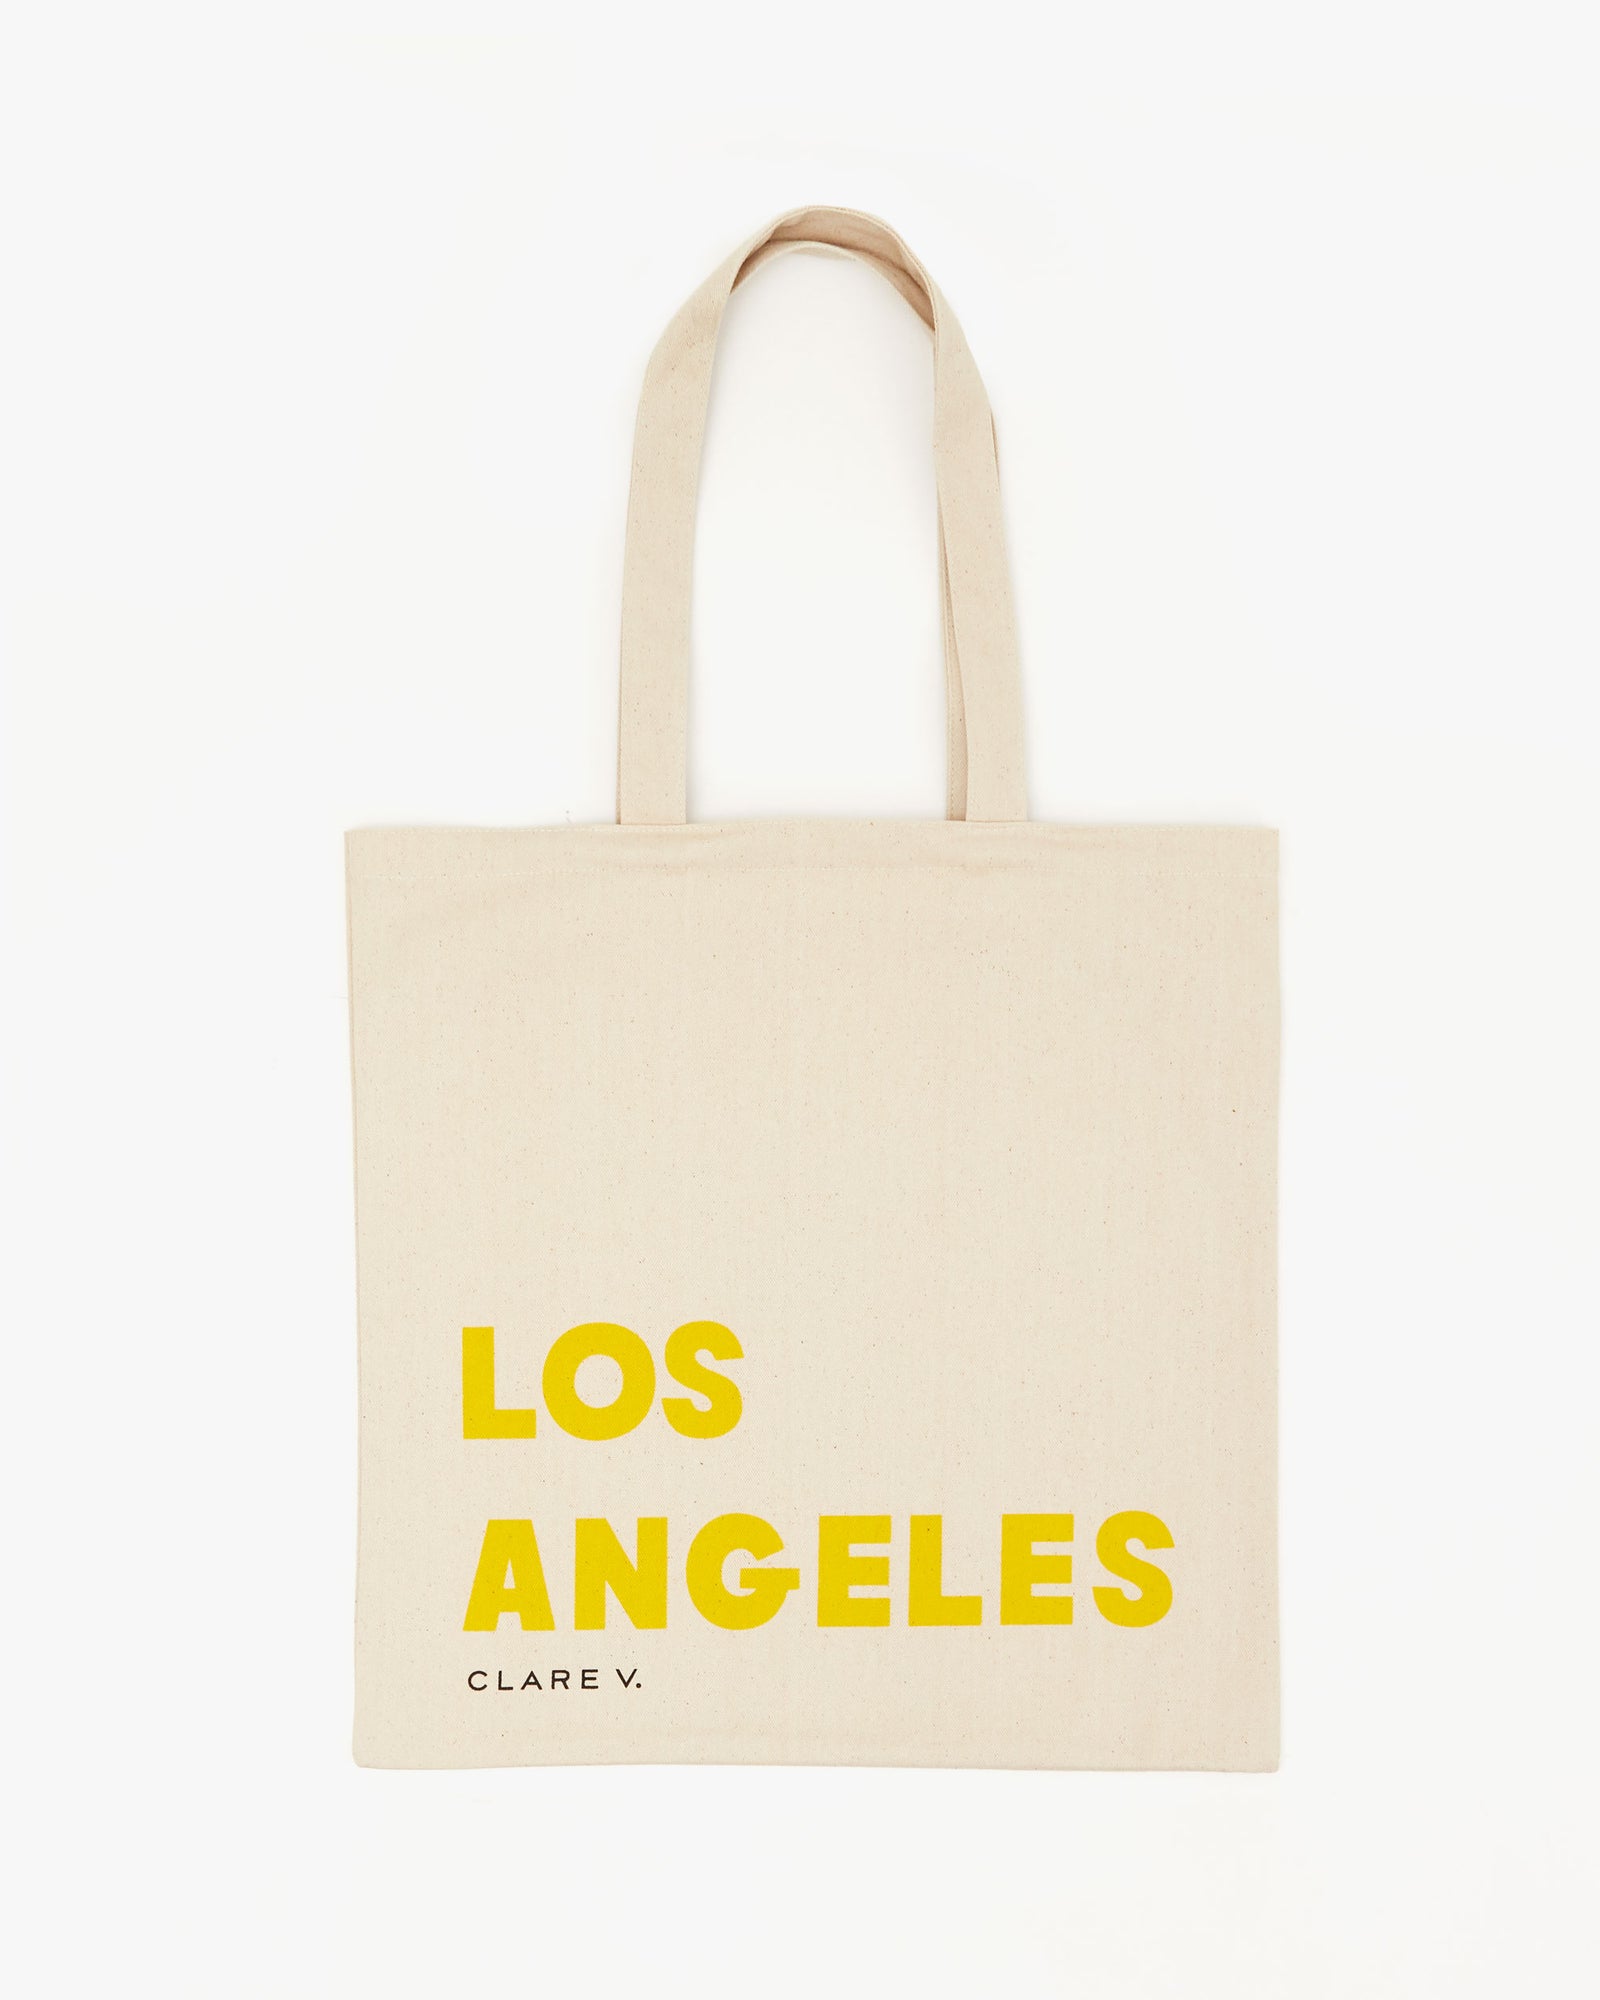 back image of the Natural Oui Canvas Store Tote. it says Los Angeles in yellow. Under that is the small Clare V. logo